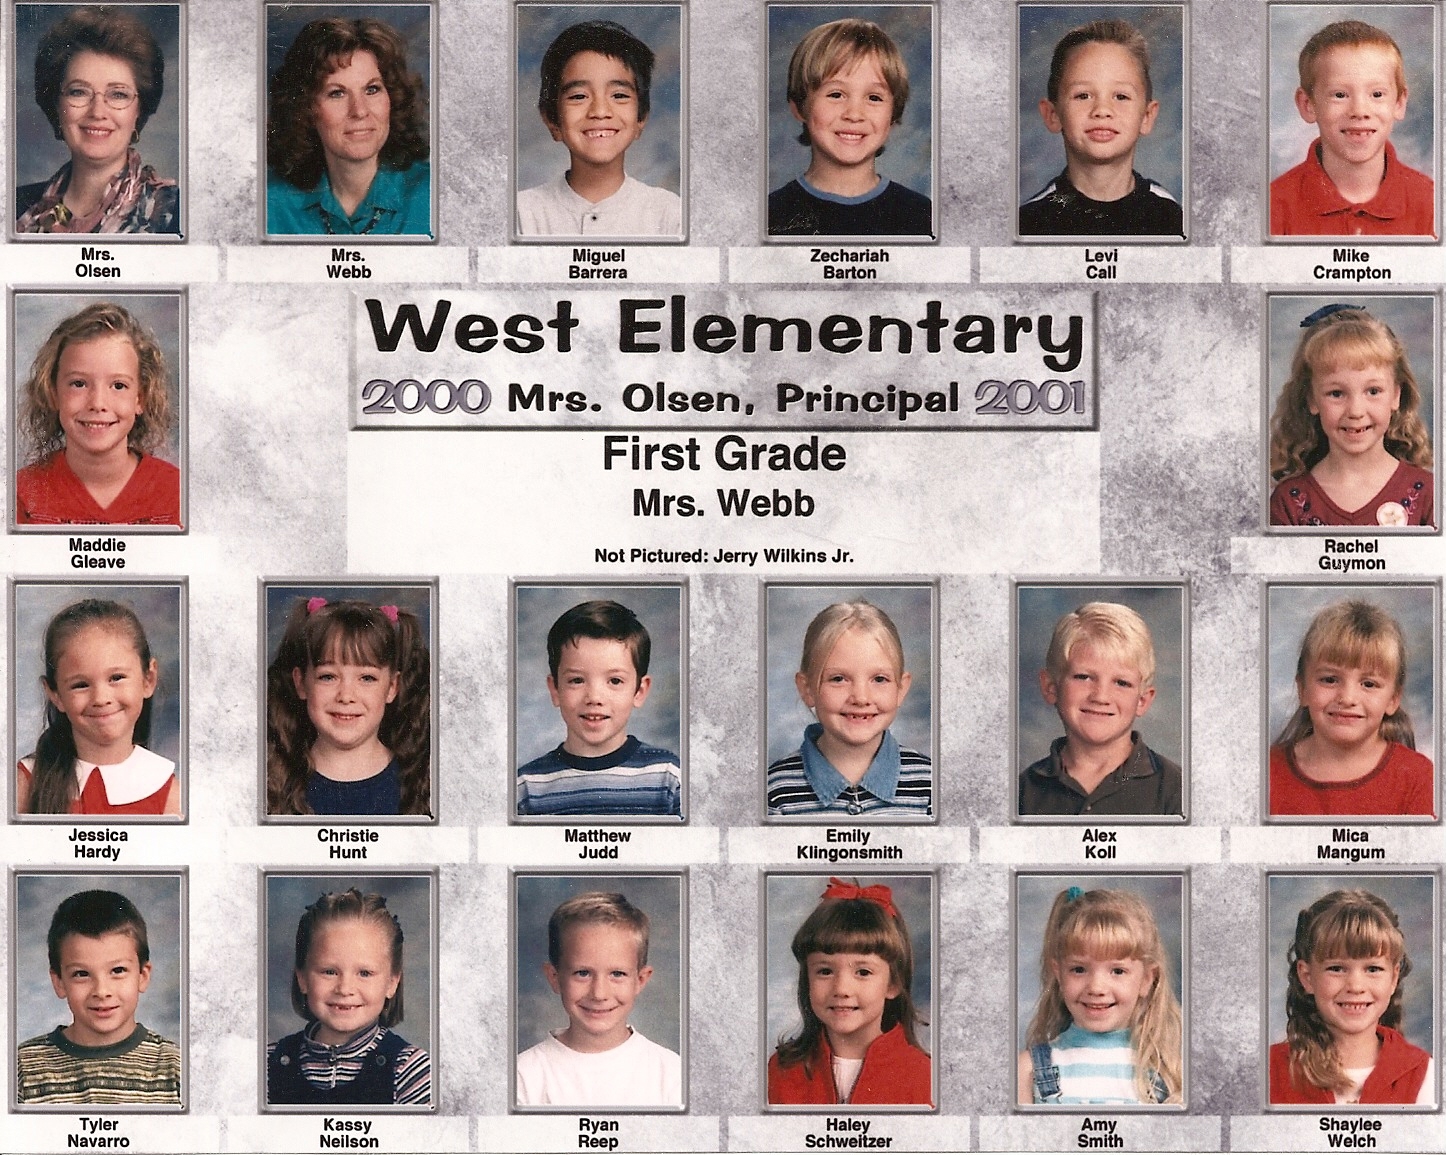 Mrs. Suzanne Webb's 2000-2001 first grade class at West Elementary School